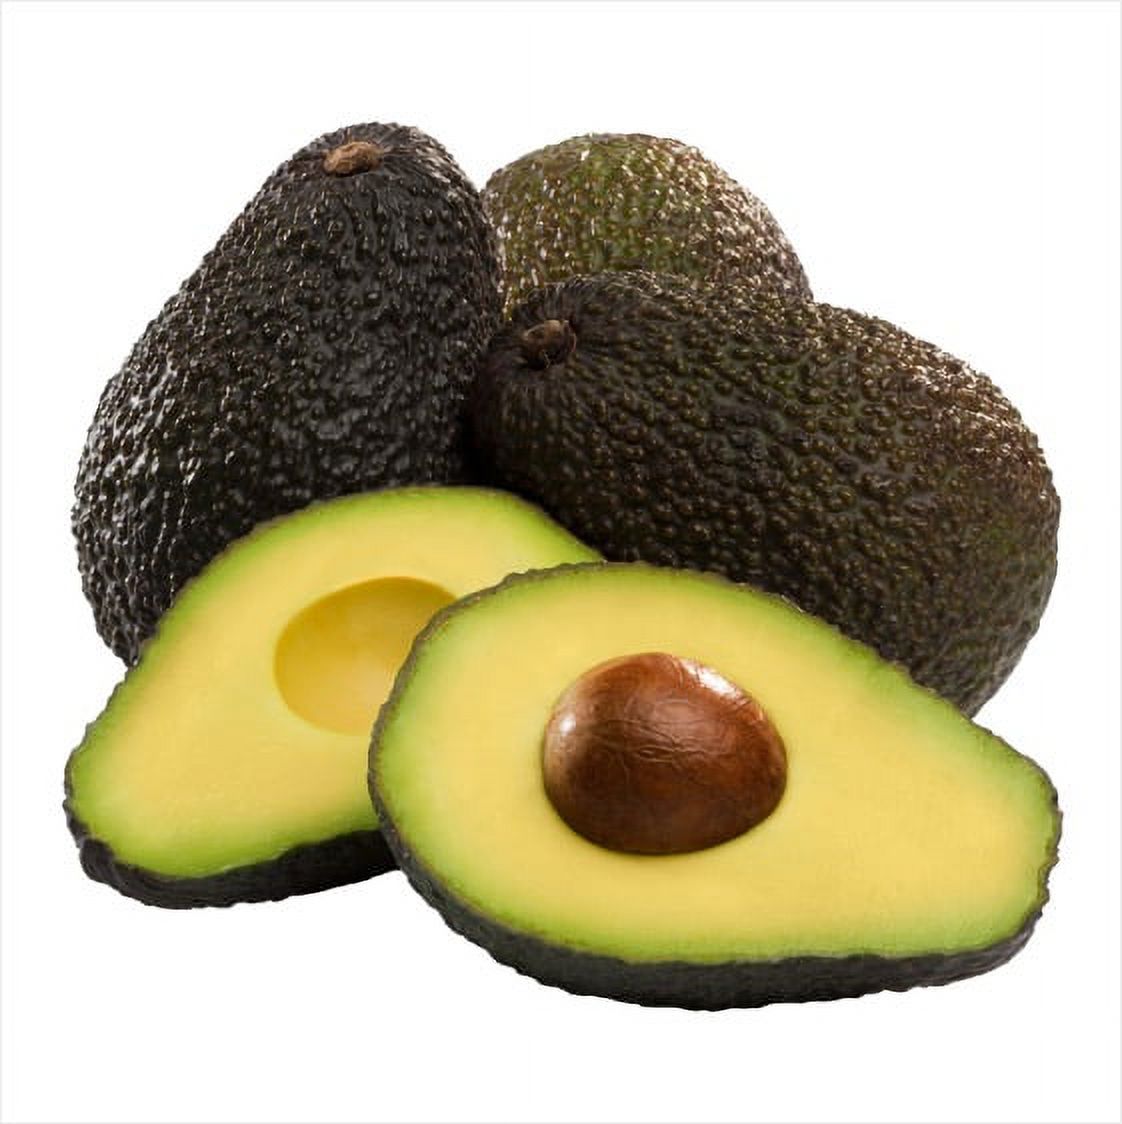 Fresh Small Hass Avocado Bag, 5-6 Count - image 2 of 6